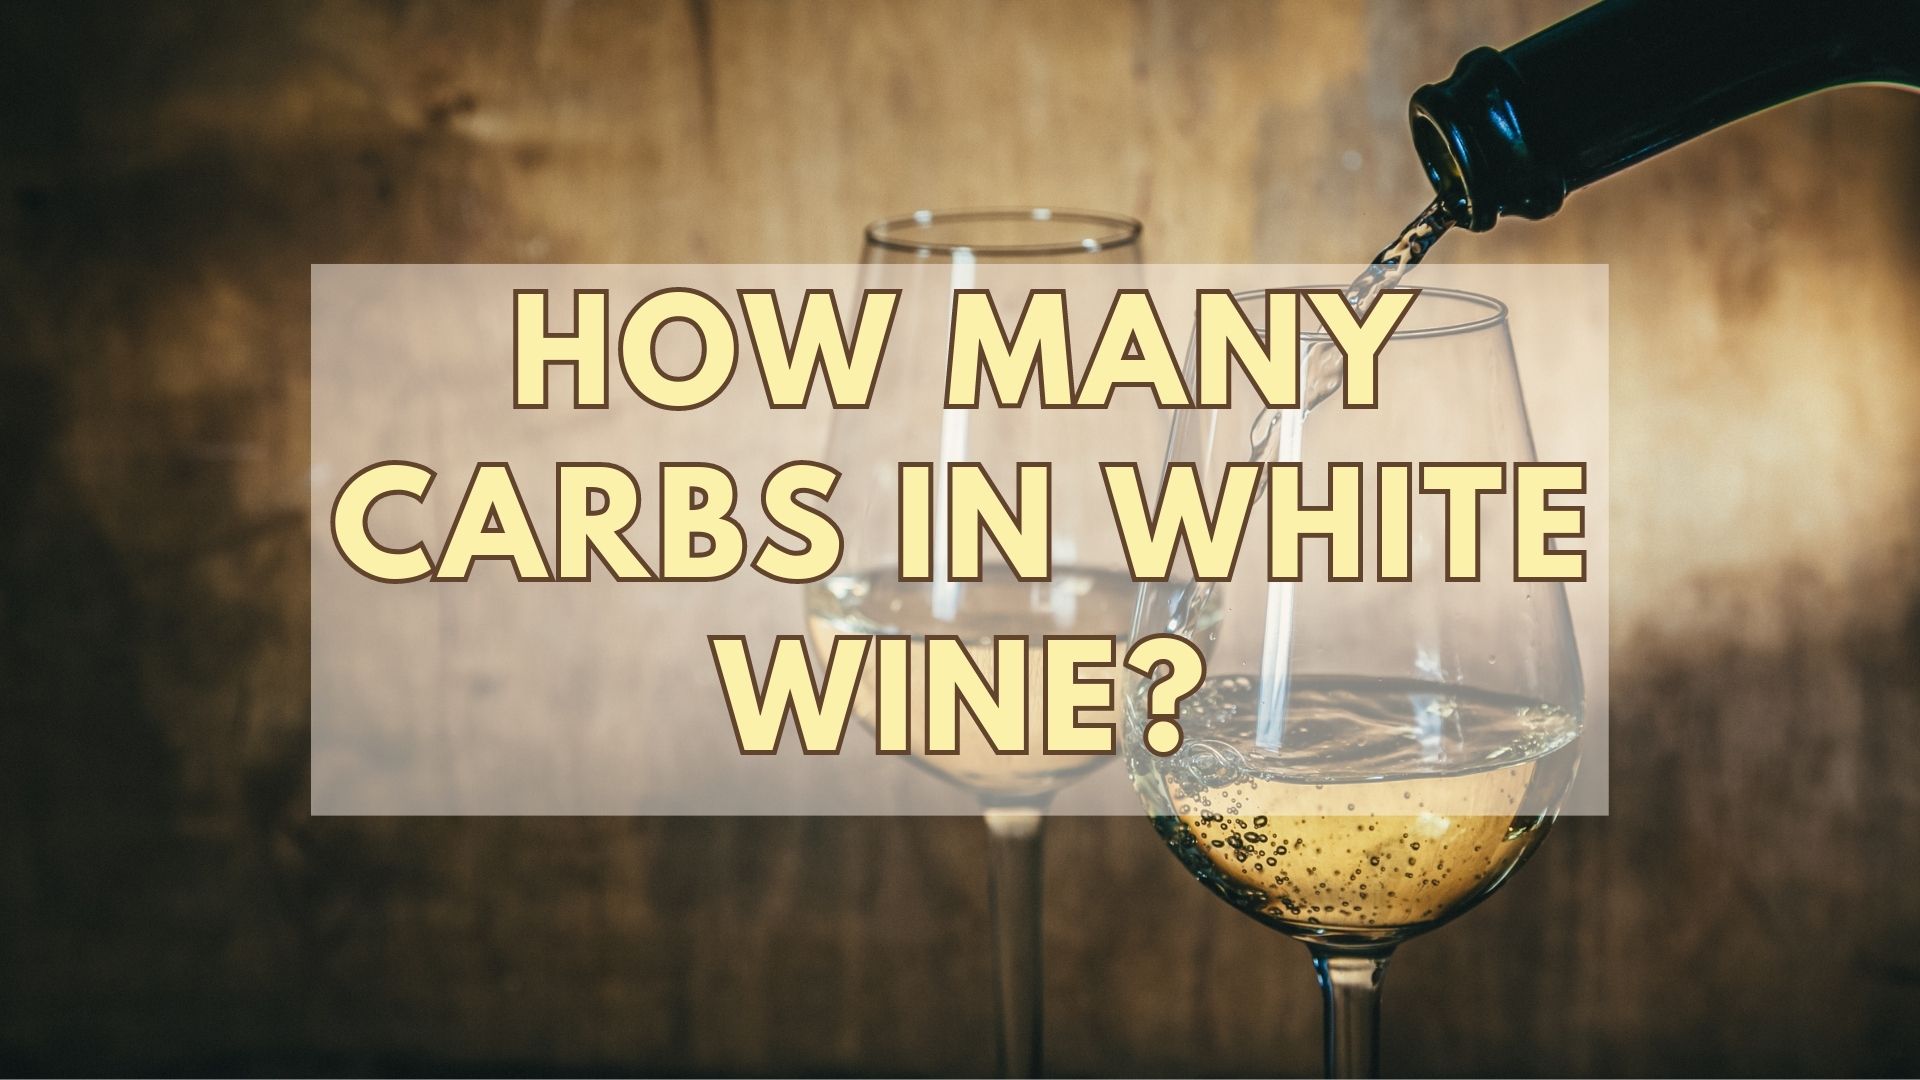 How Many Carbs In White Wine